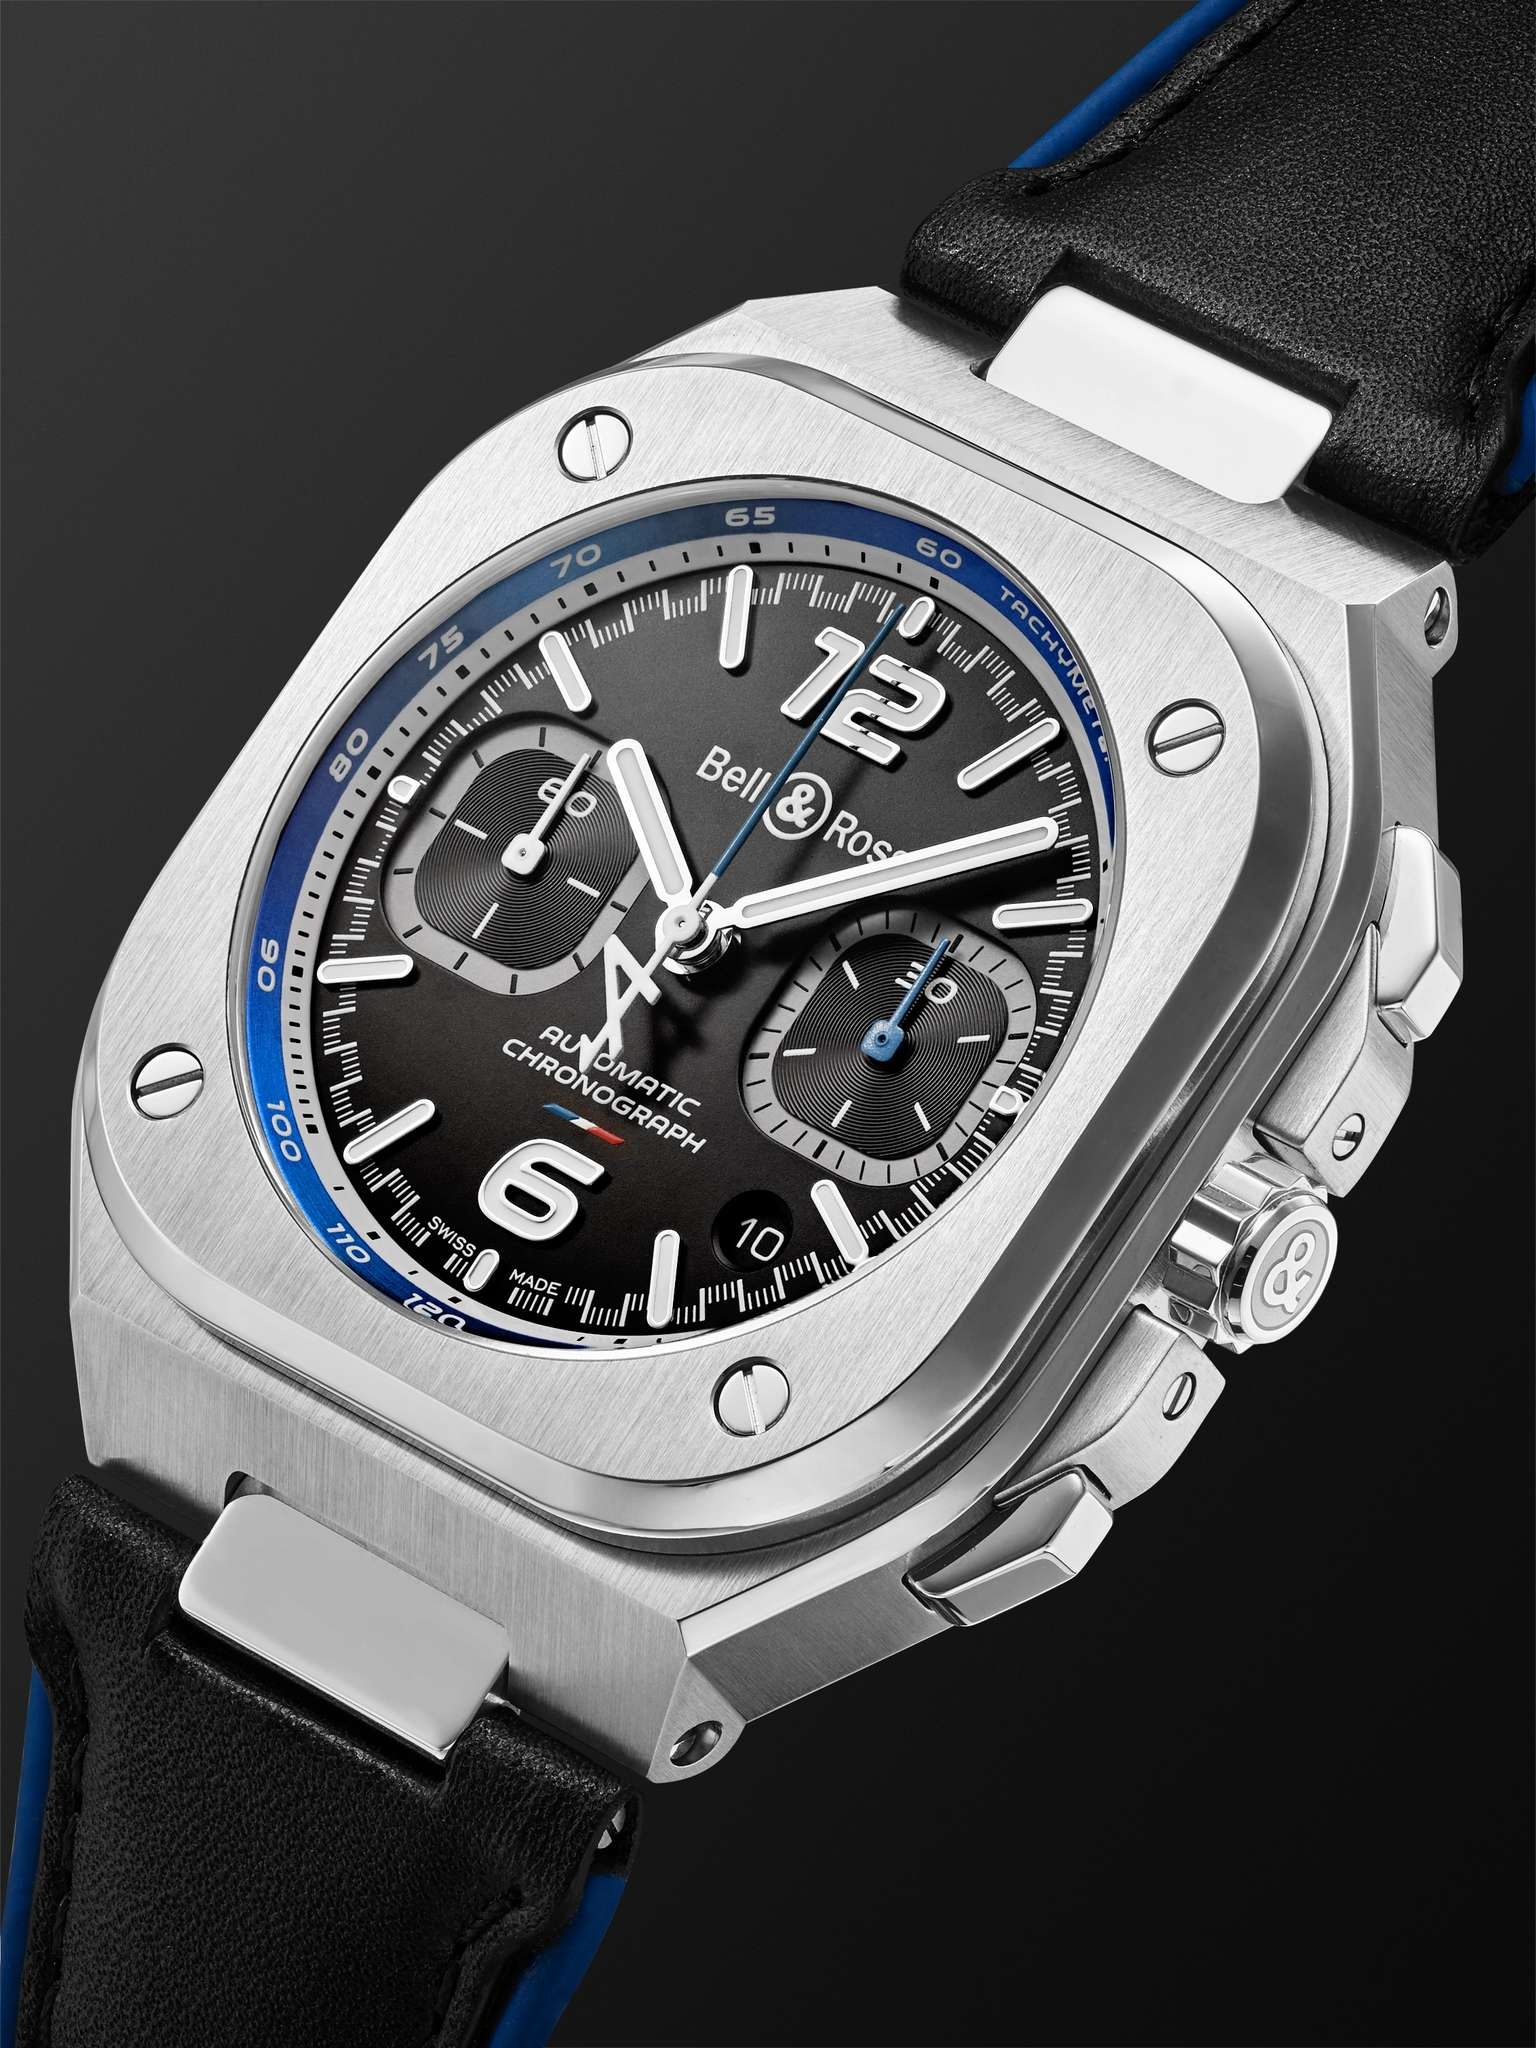 BR 05 Alpine Automatic Chronograph 42mm Stainless Steel and Leather Watch, Ref. No. BR05C-A523-ST/SC - 4